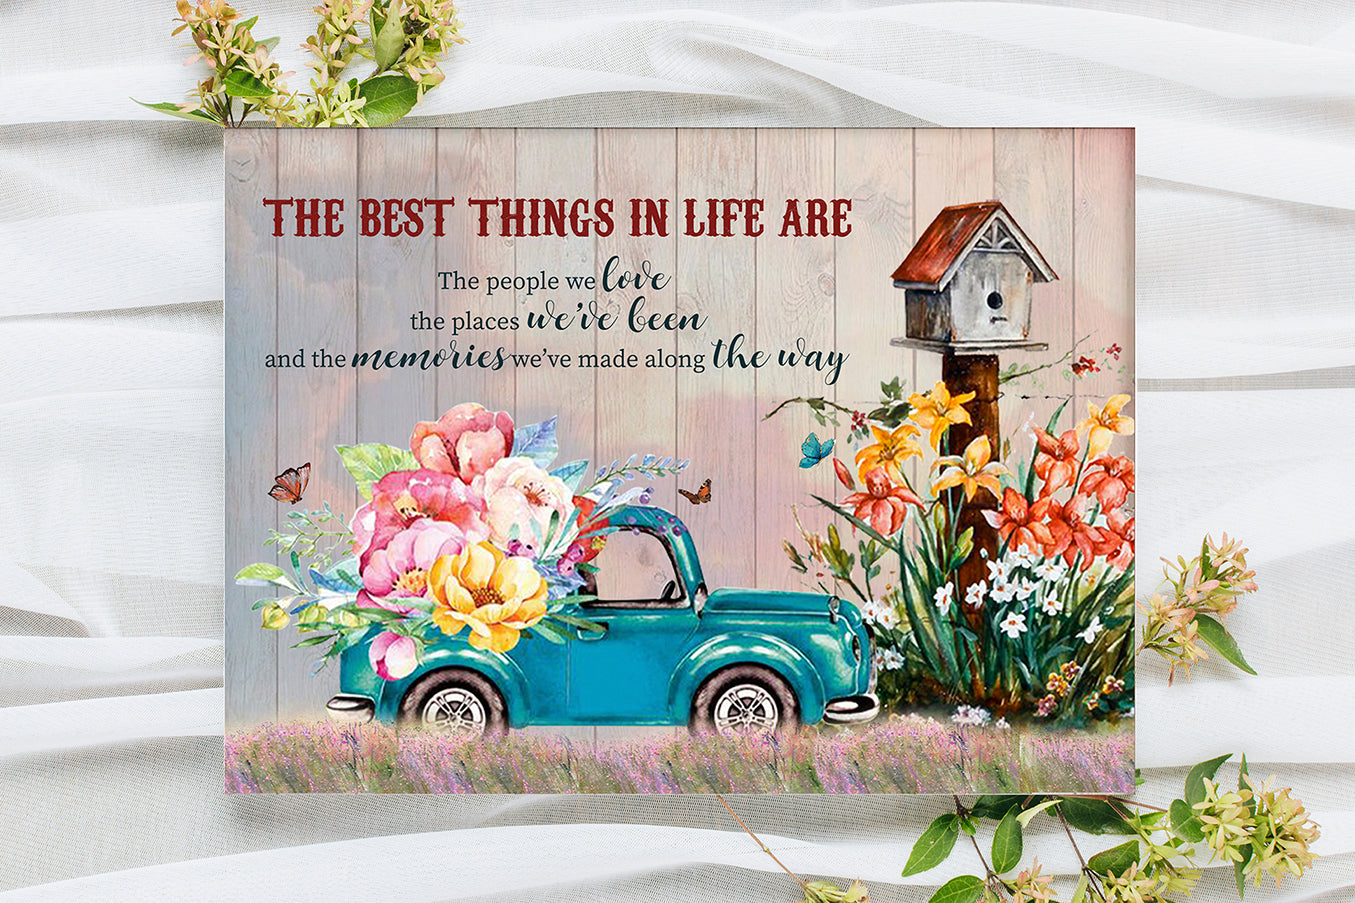 Rusty Truck With Flowers Poster The Best Things In Life